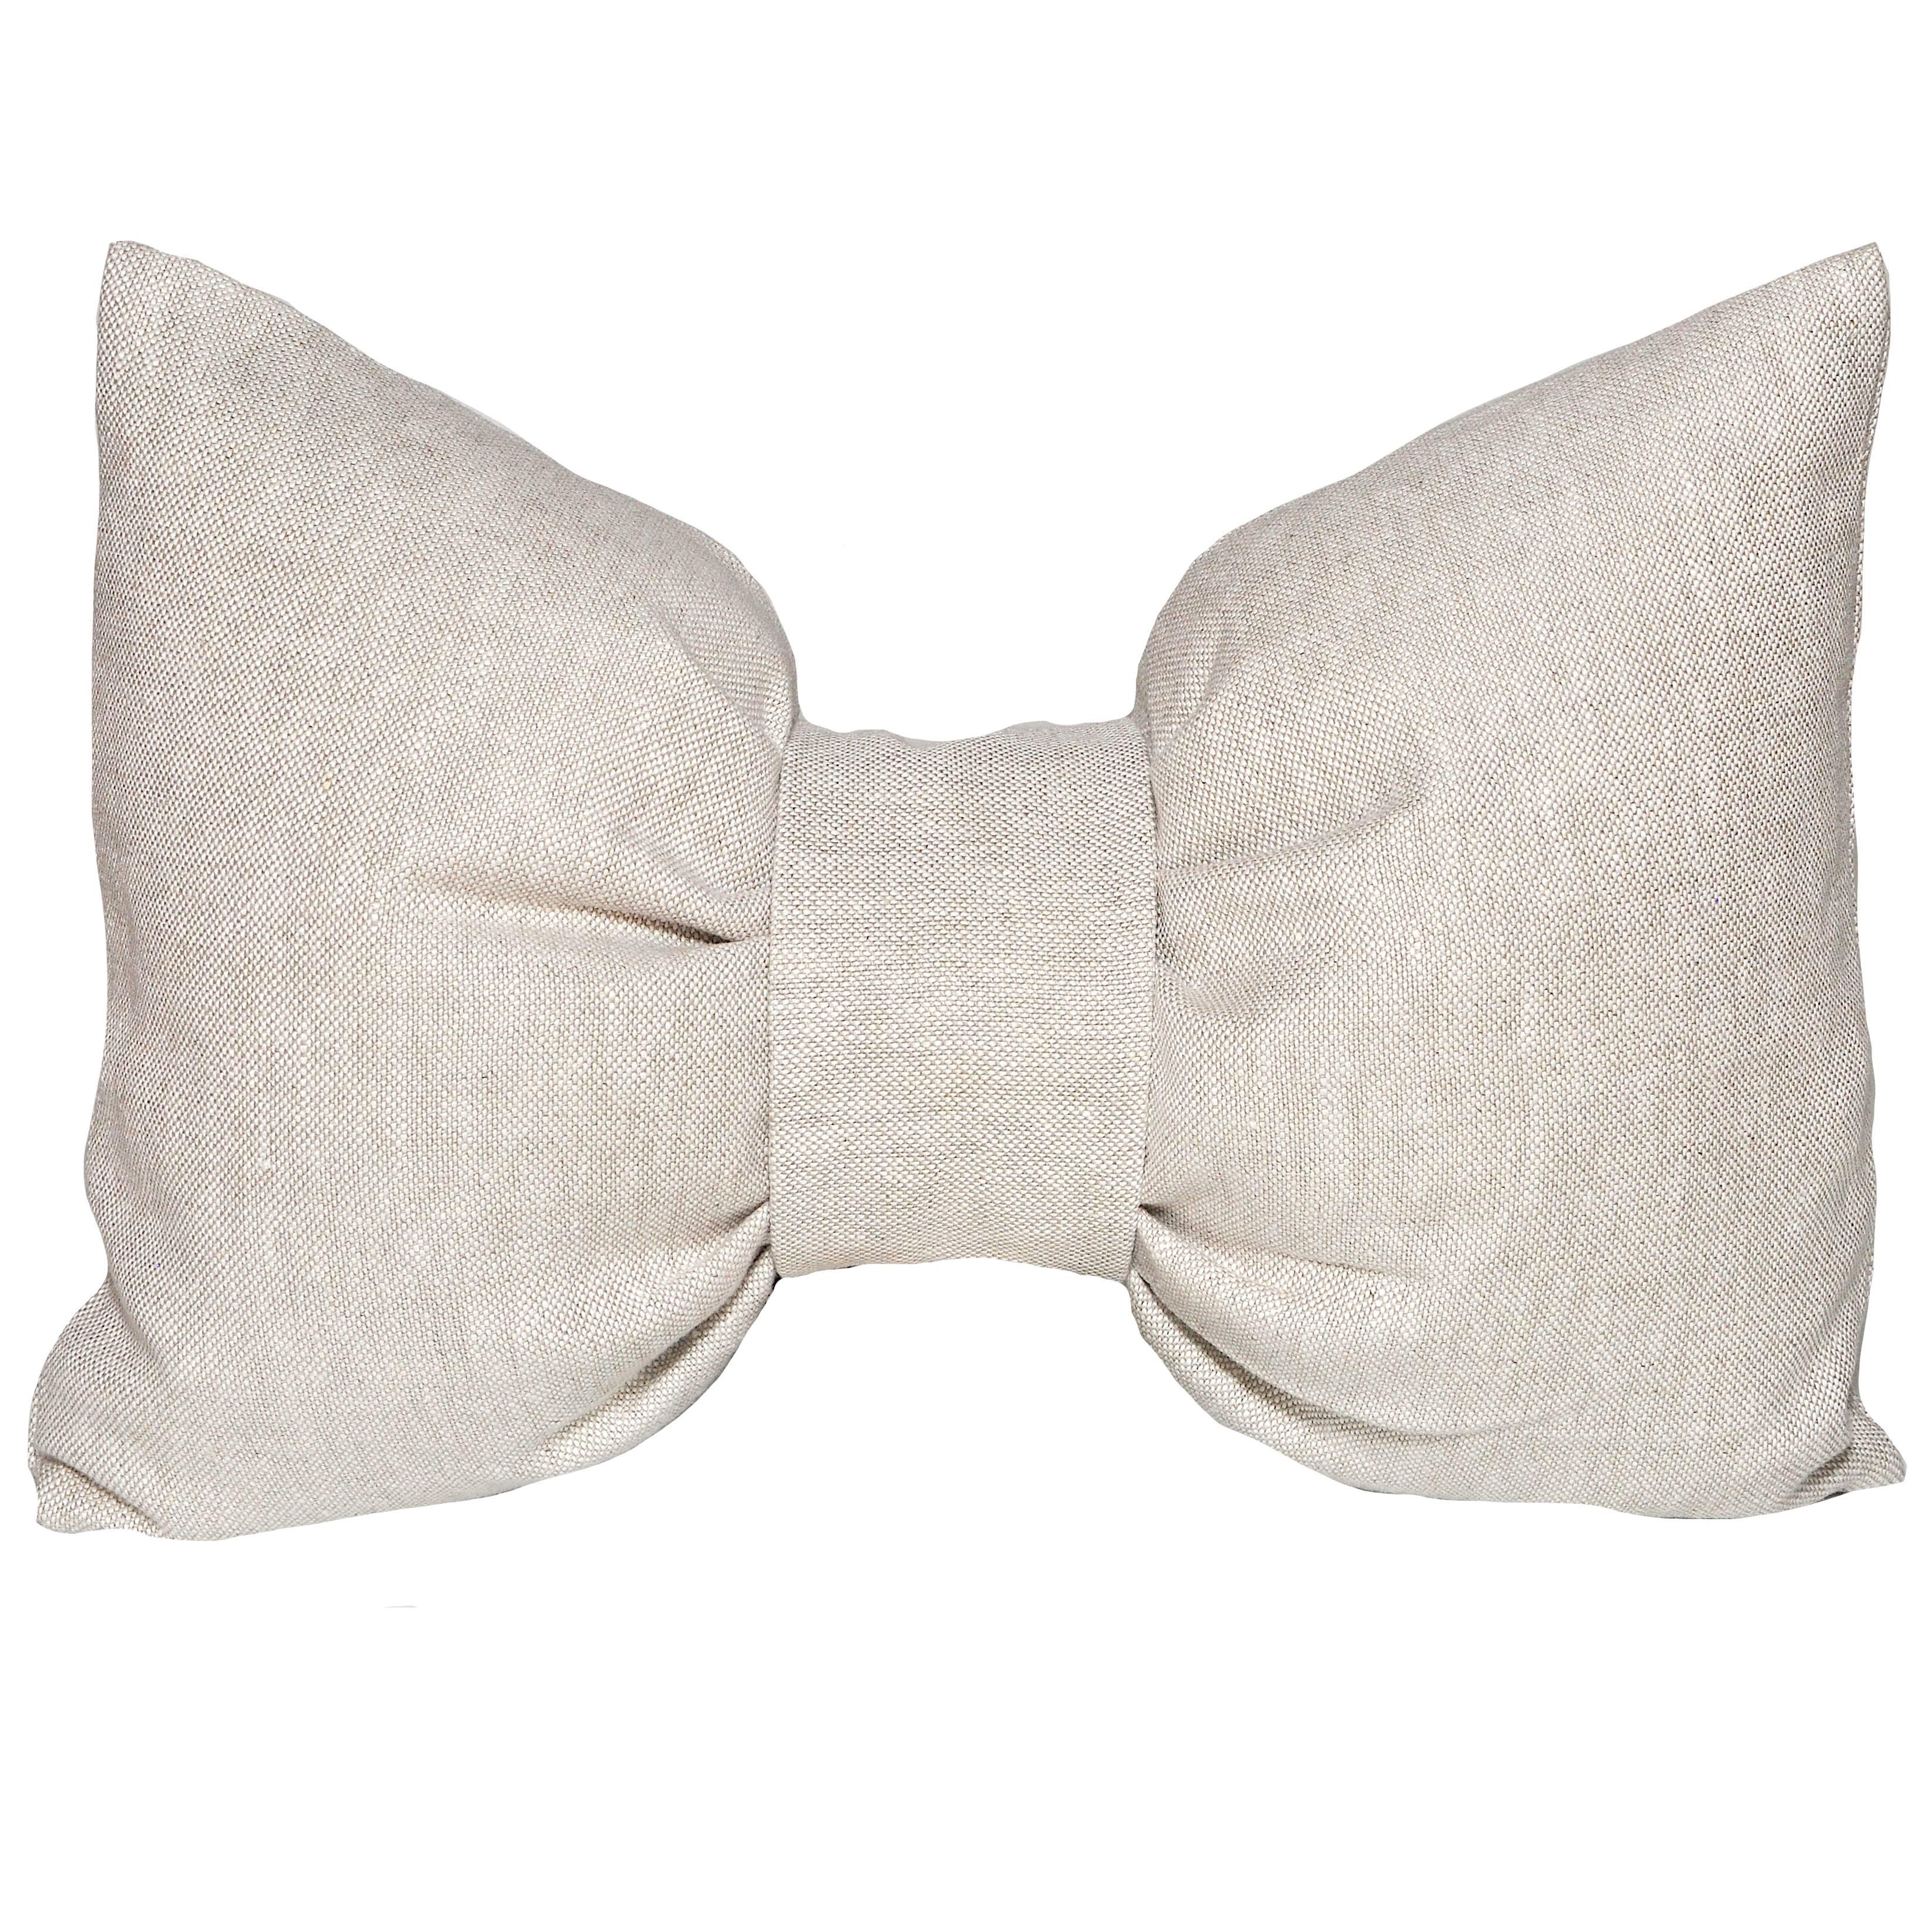 Large Designer Bow Pillow in Vintage Irish Linen Natural Oatmeal Cushion For Sale